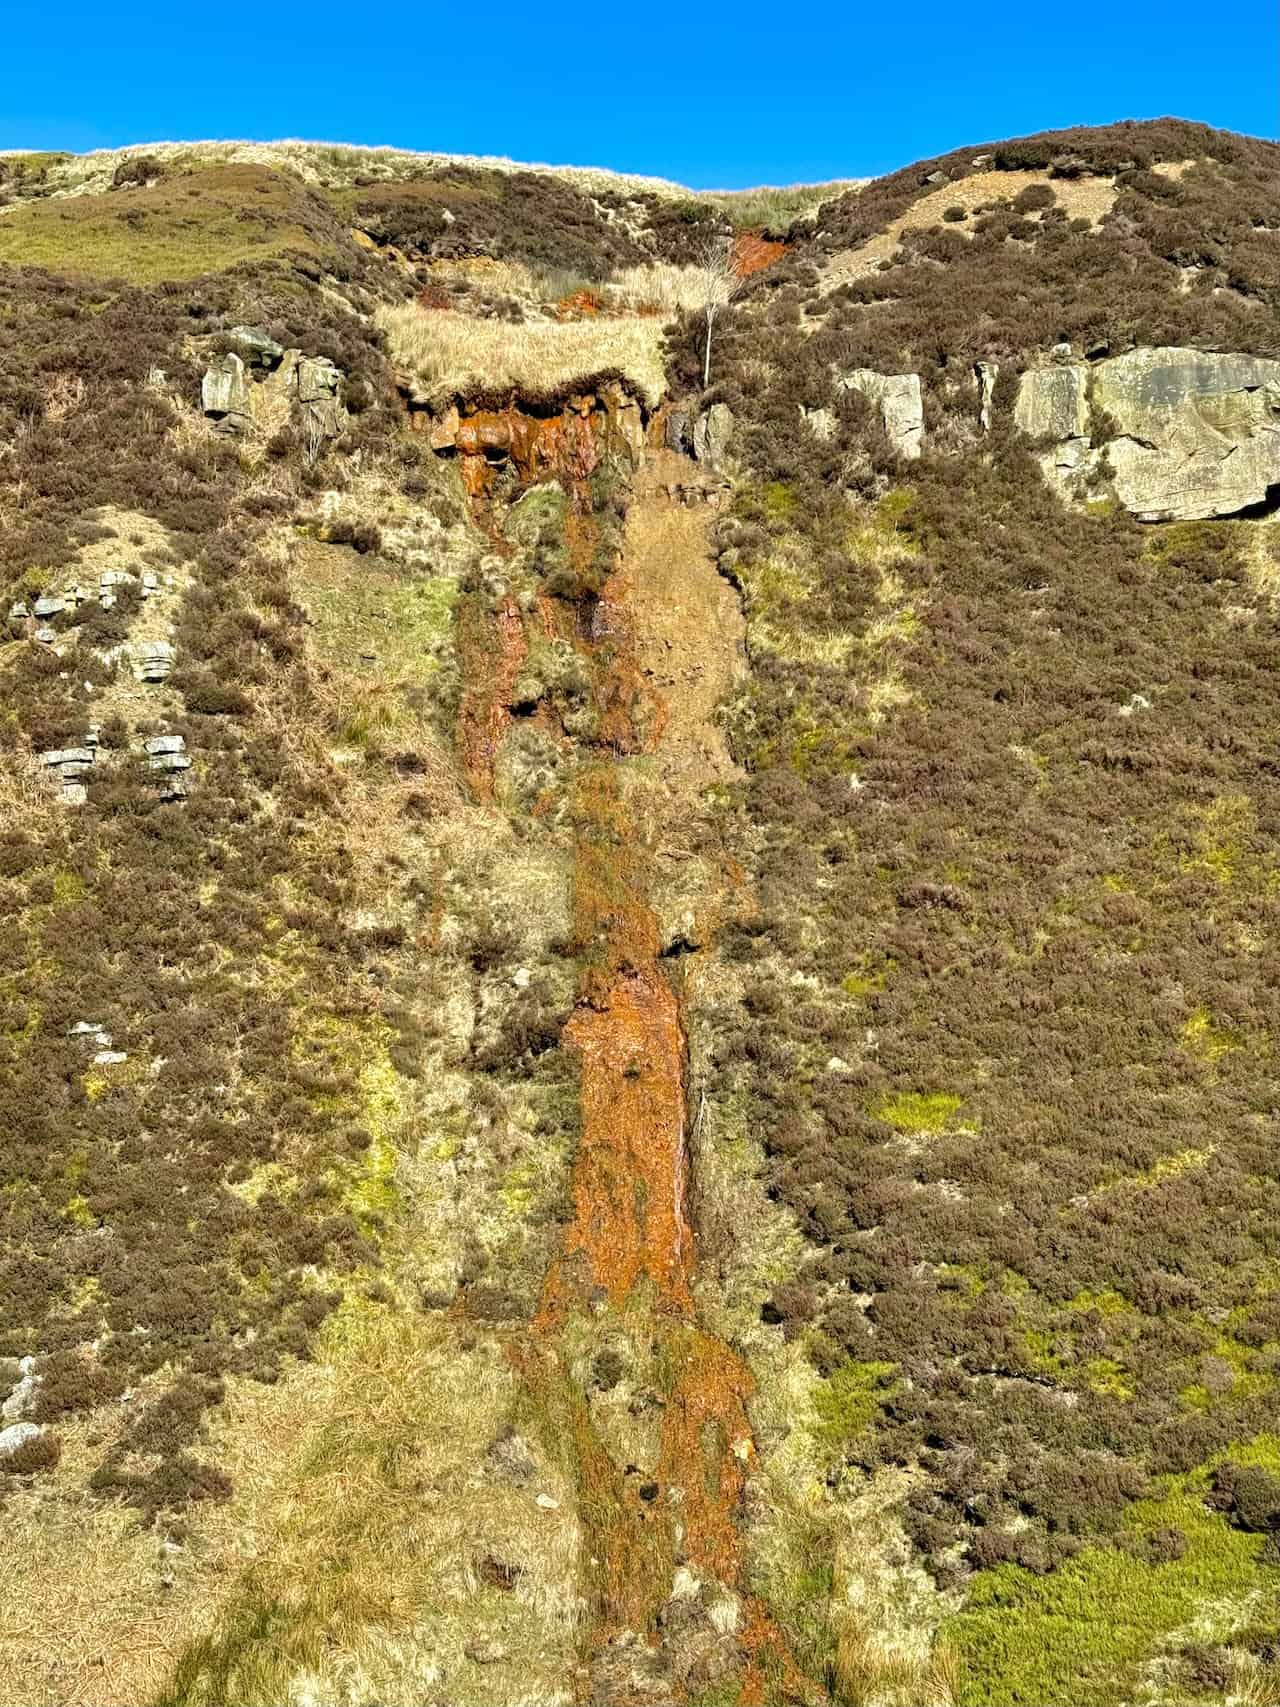 As for the soil, the presence of iron oxides influences not only its colour but also its composition and health. In the North York Moors, high concentrations of iron oxides in the soil can result in distinct orange colouration. While iron is essential for plant growth, excessive amounts can be detrimental, affecting soil pH and nutrient availability. The region's long history of industrial activity, particularly ironstone mining which peaked in the 19th and early 20th centuries, has significantly impacted the landscape, altering water and soil chemistry through the exposure of ironstone and other minerals.